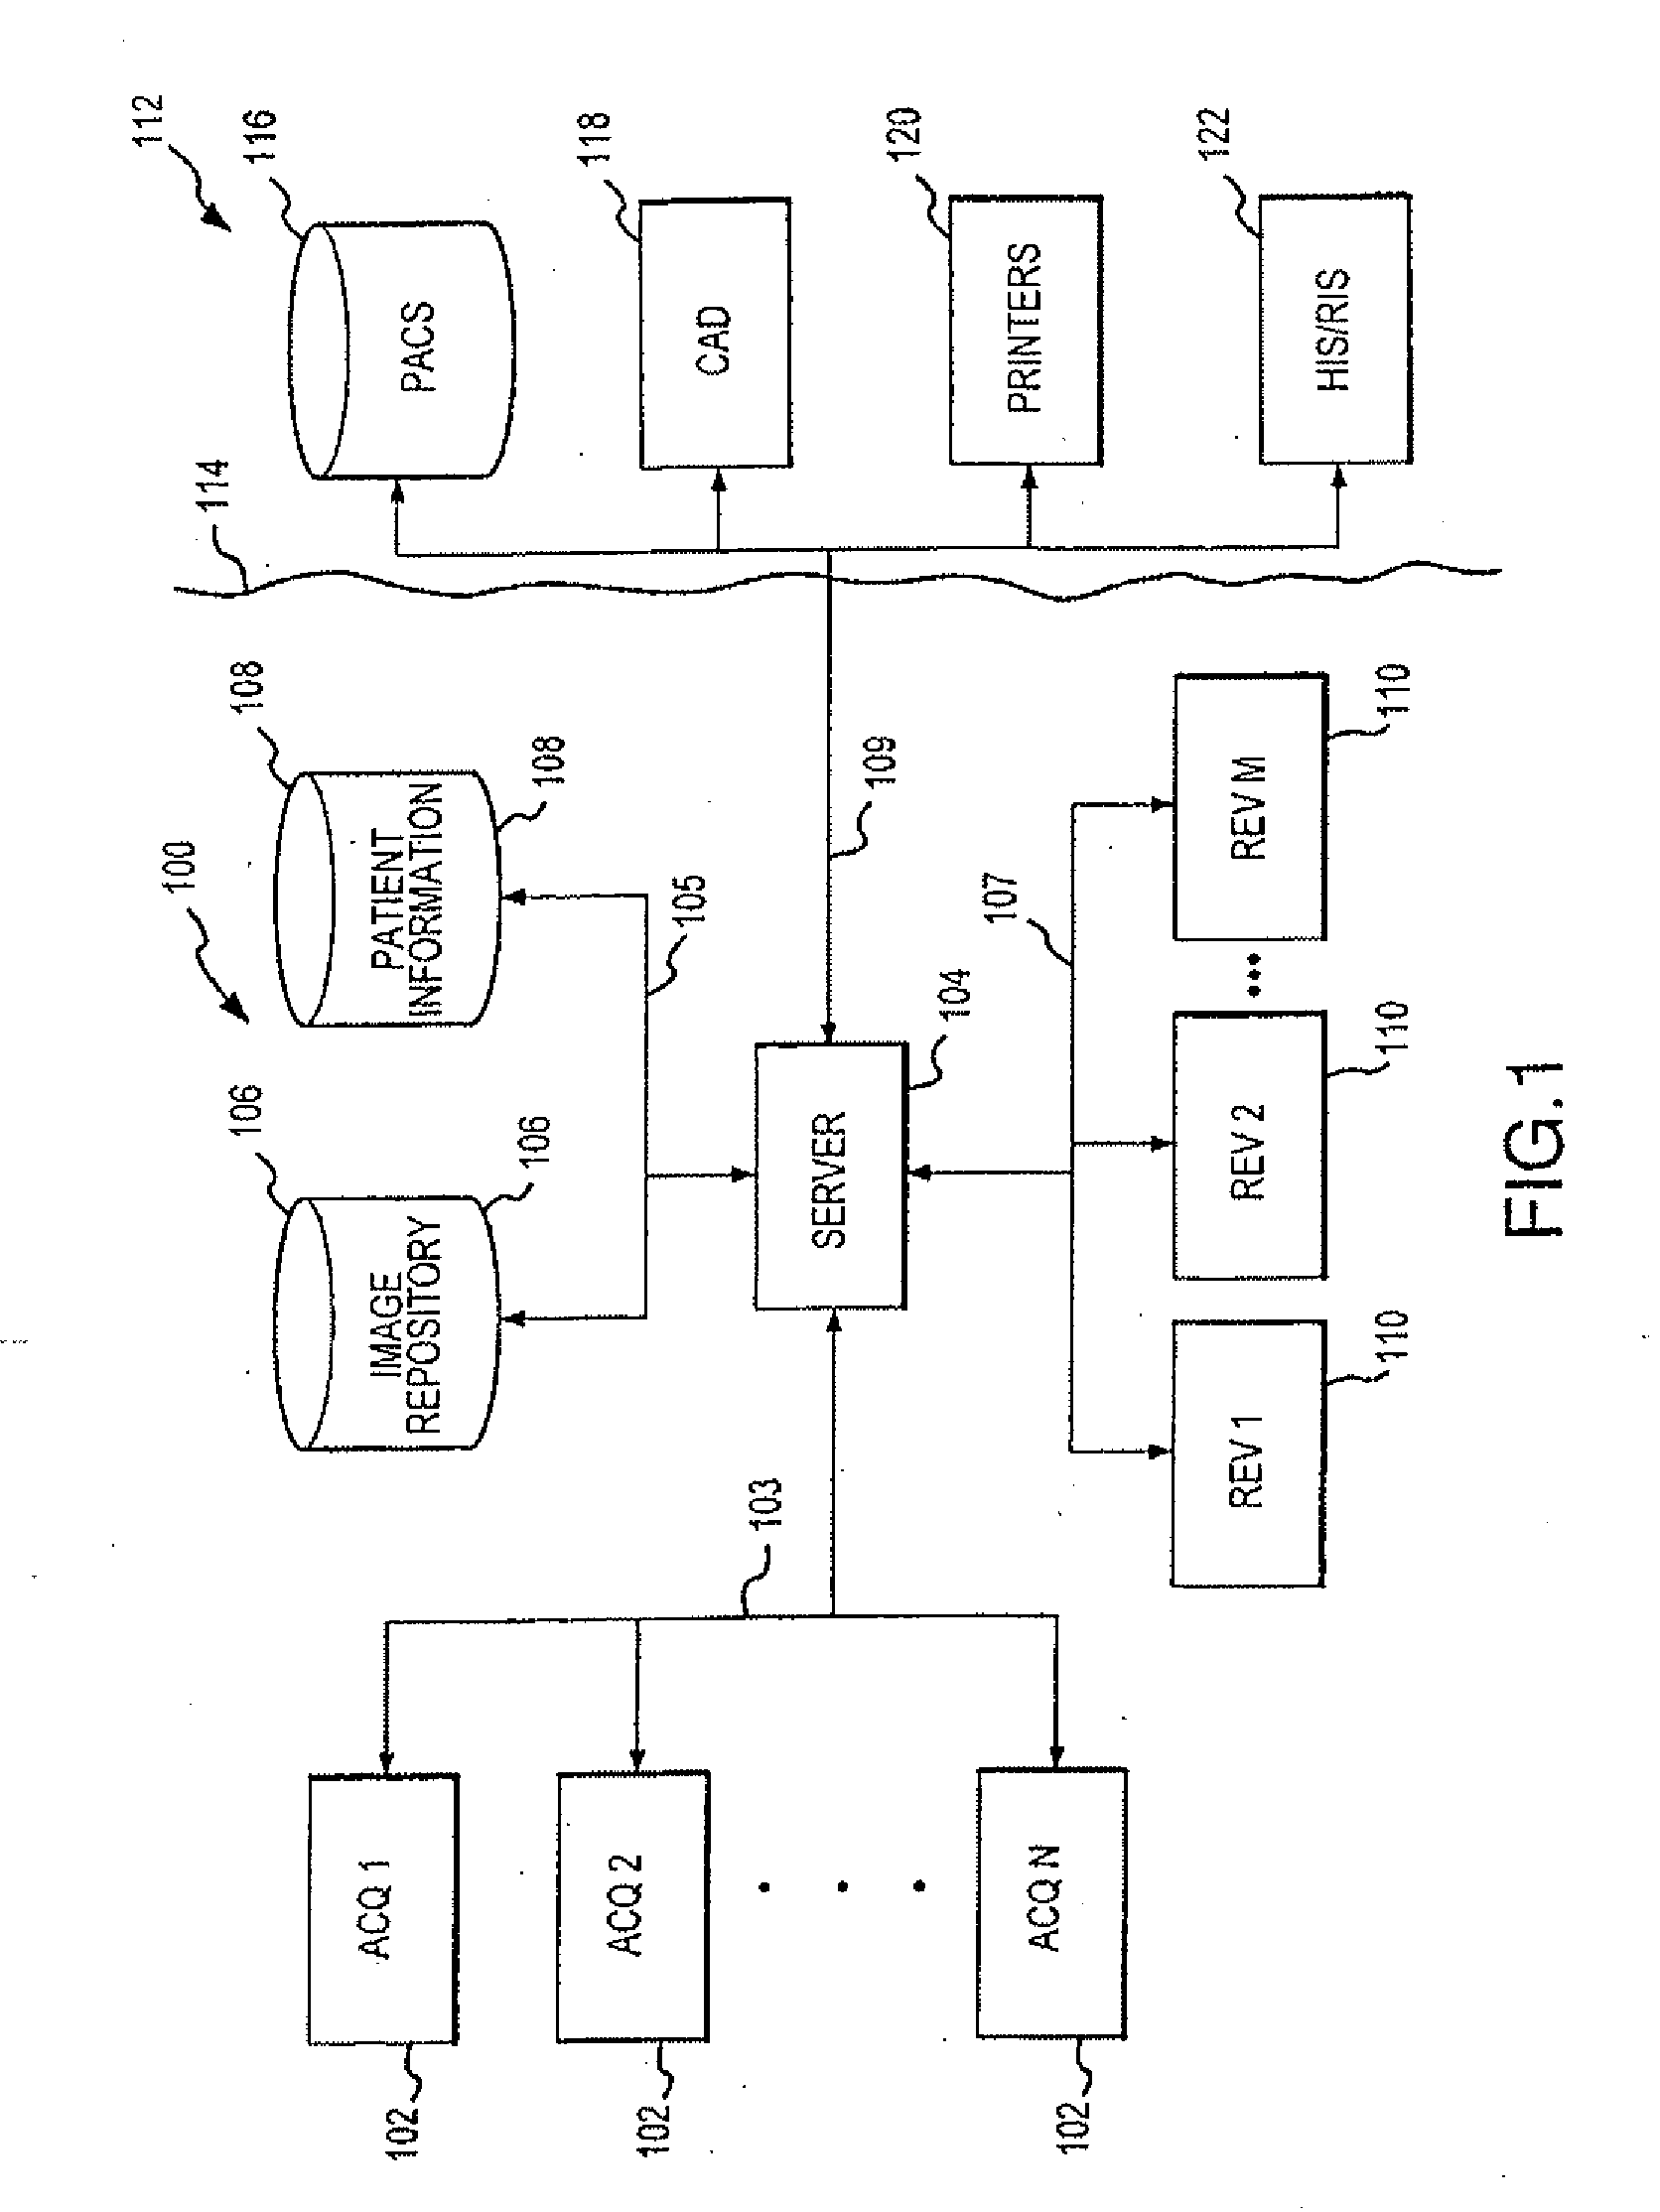 Distributed Architecture for Mammographic Image Acquisition and Processing